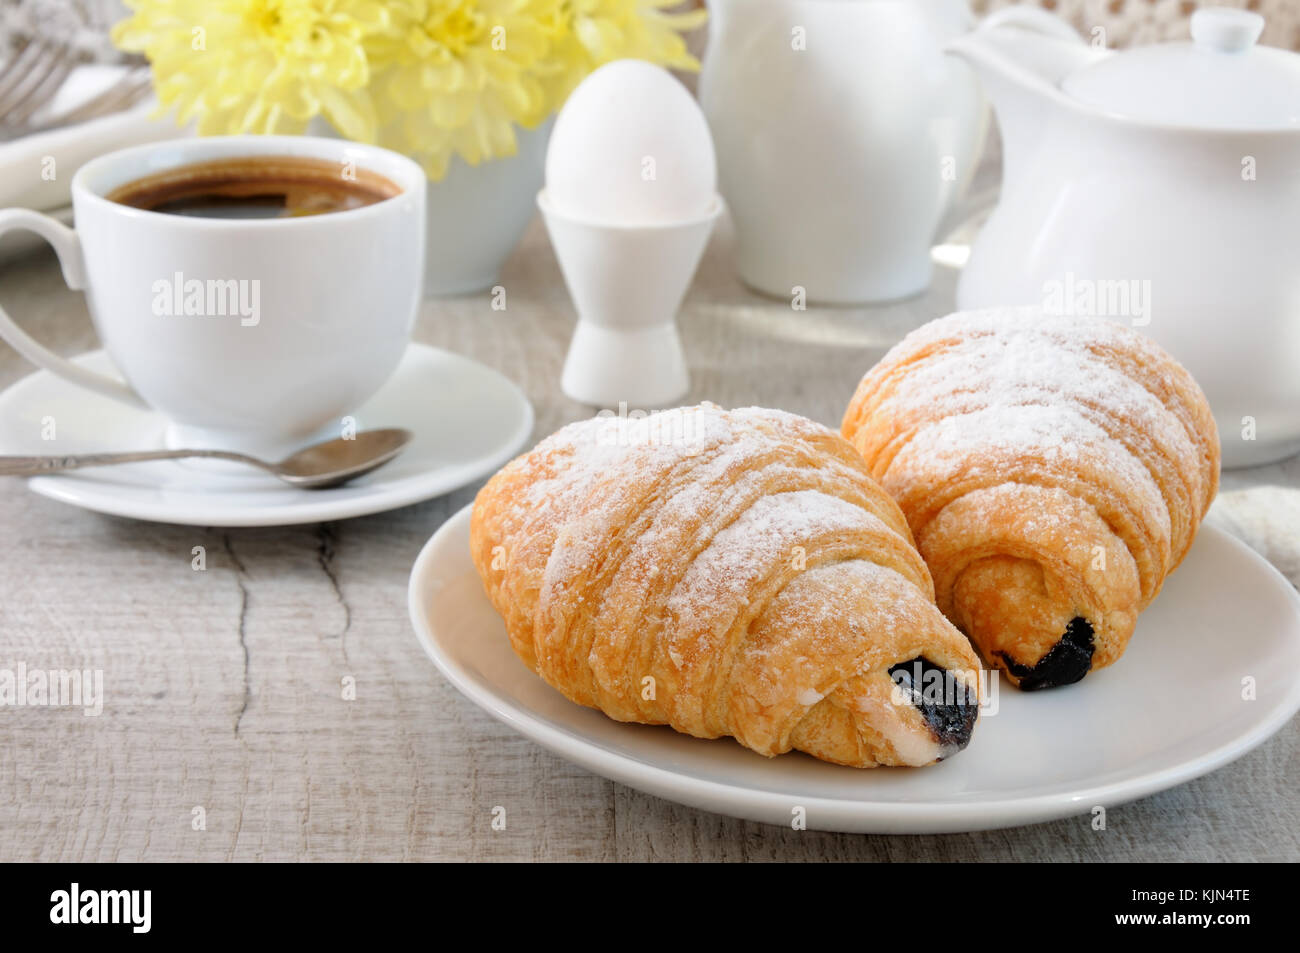 Croissants with chocolate filling cup and fresh morning coffee. Foreground close-up Stock Photo